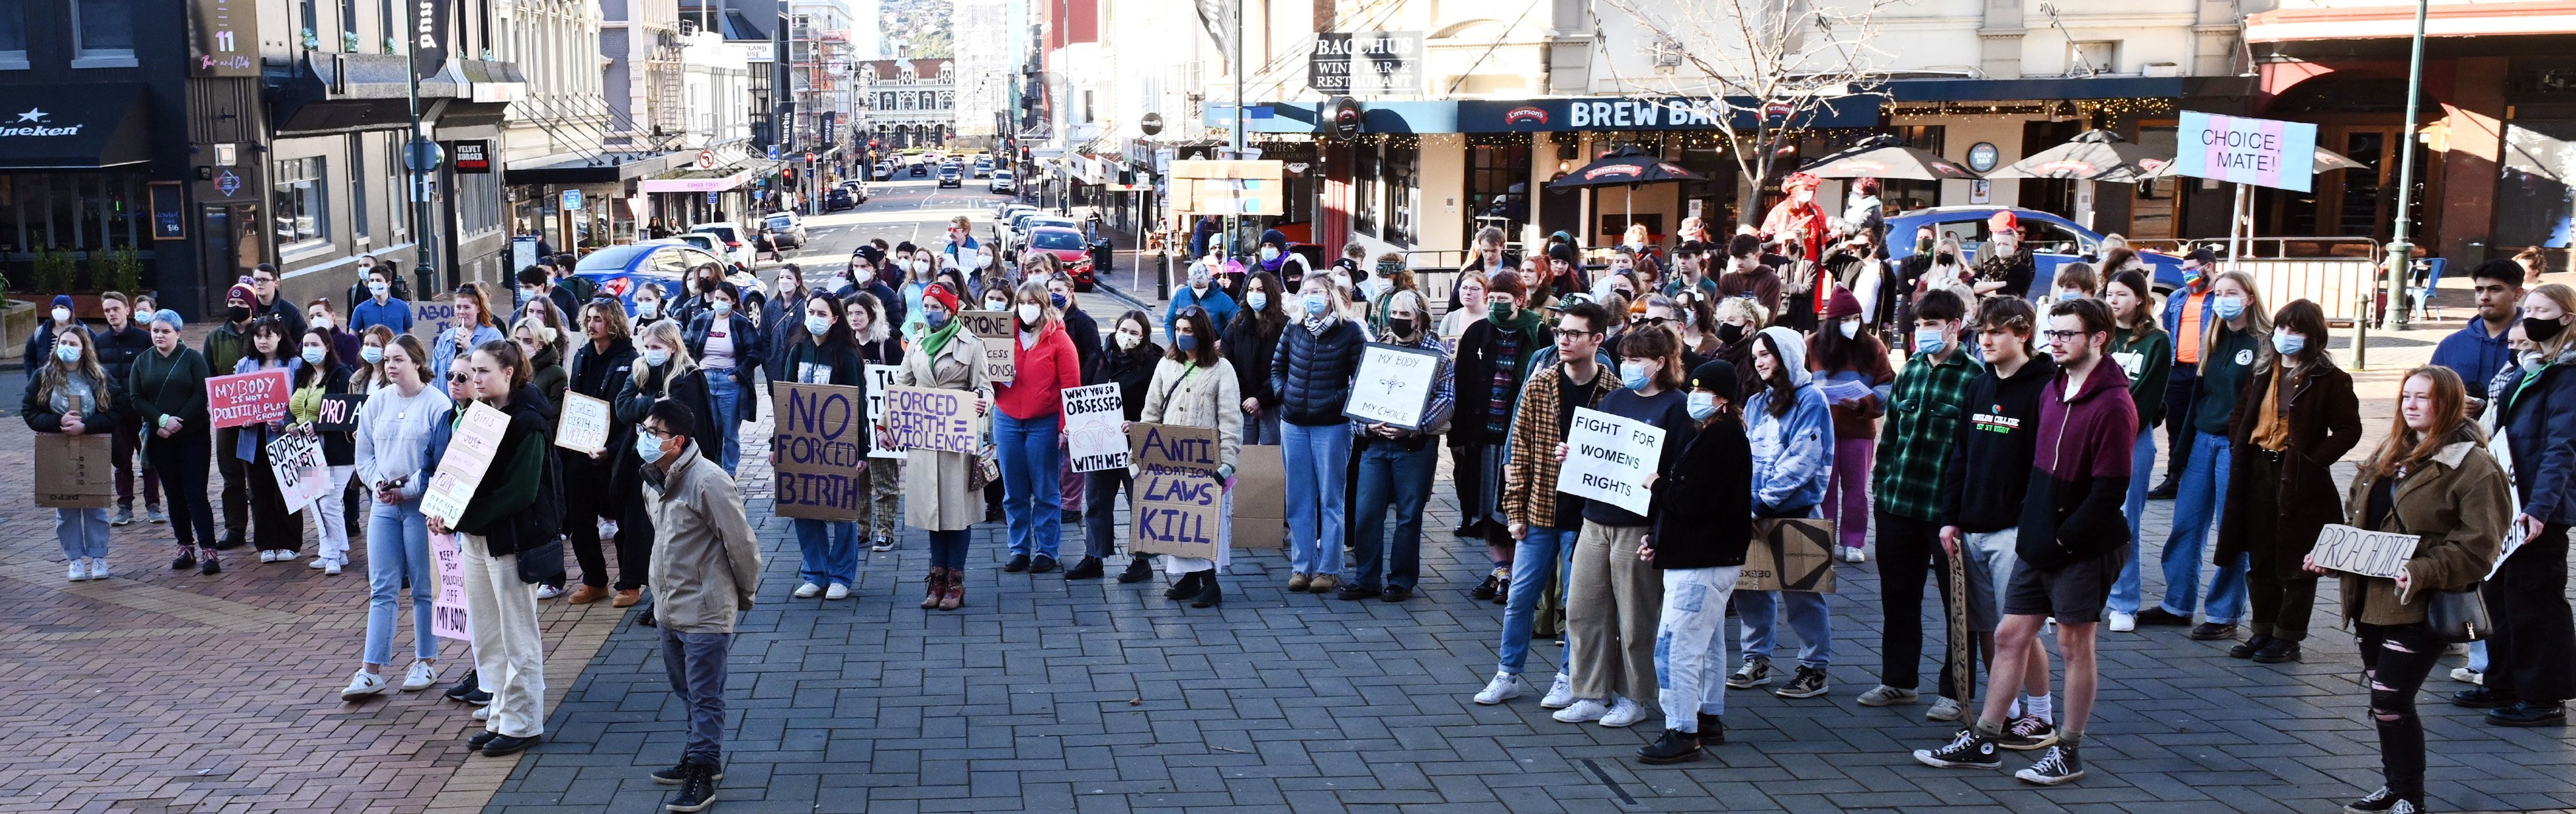 More than 100 people rally in the Octagon, in Dunedin, on Saturday to support Americans who have...